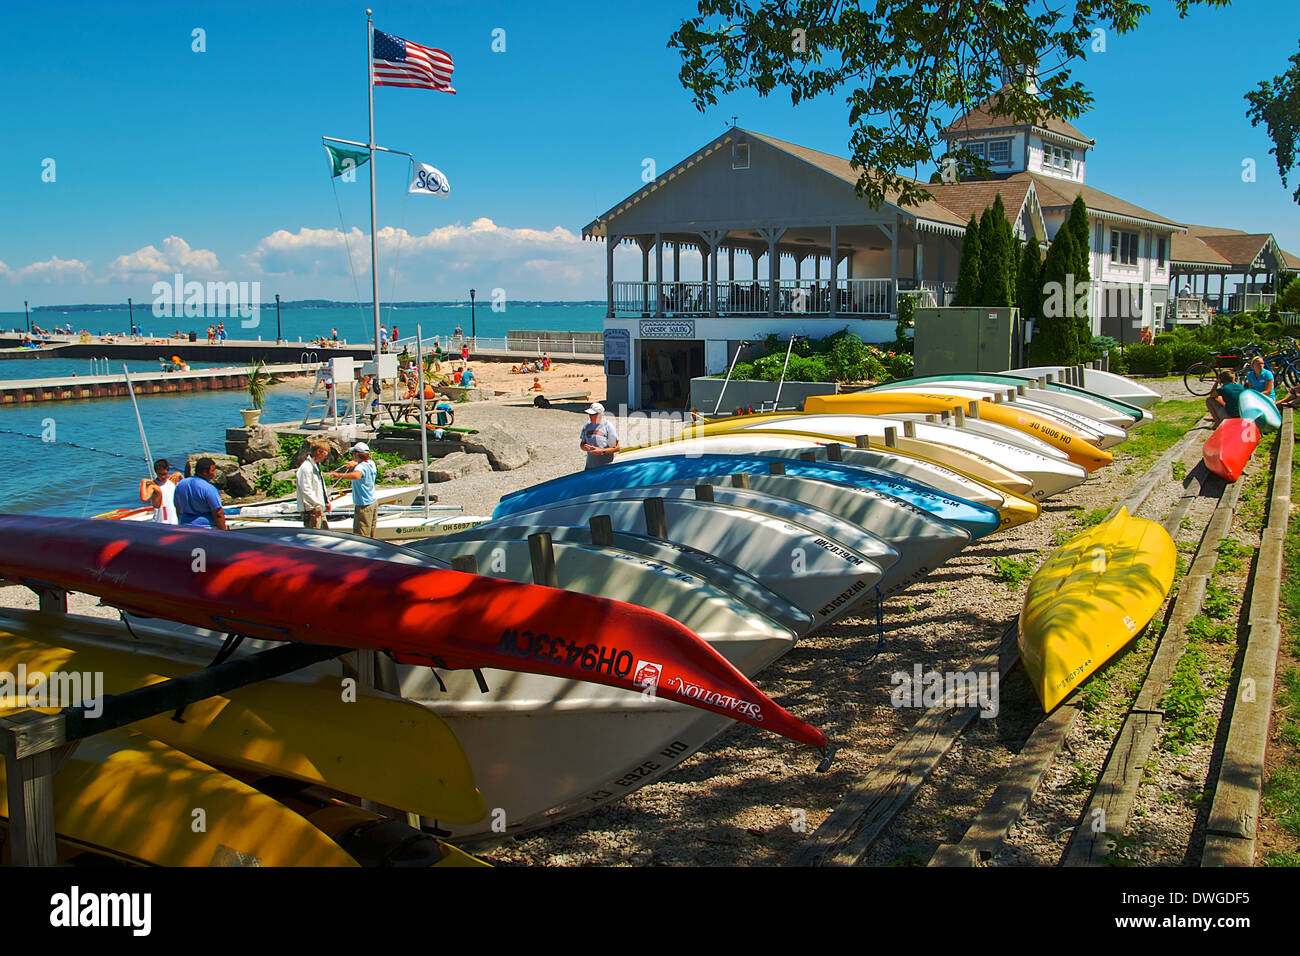 boats at Lakeside Ohio ready for summer tourists Stock Photo